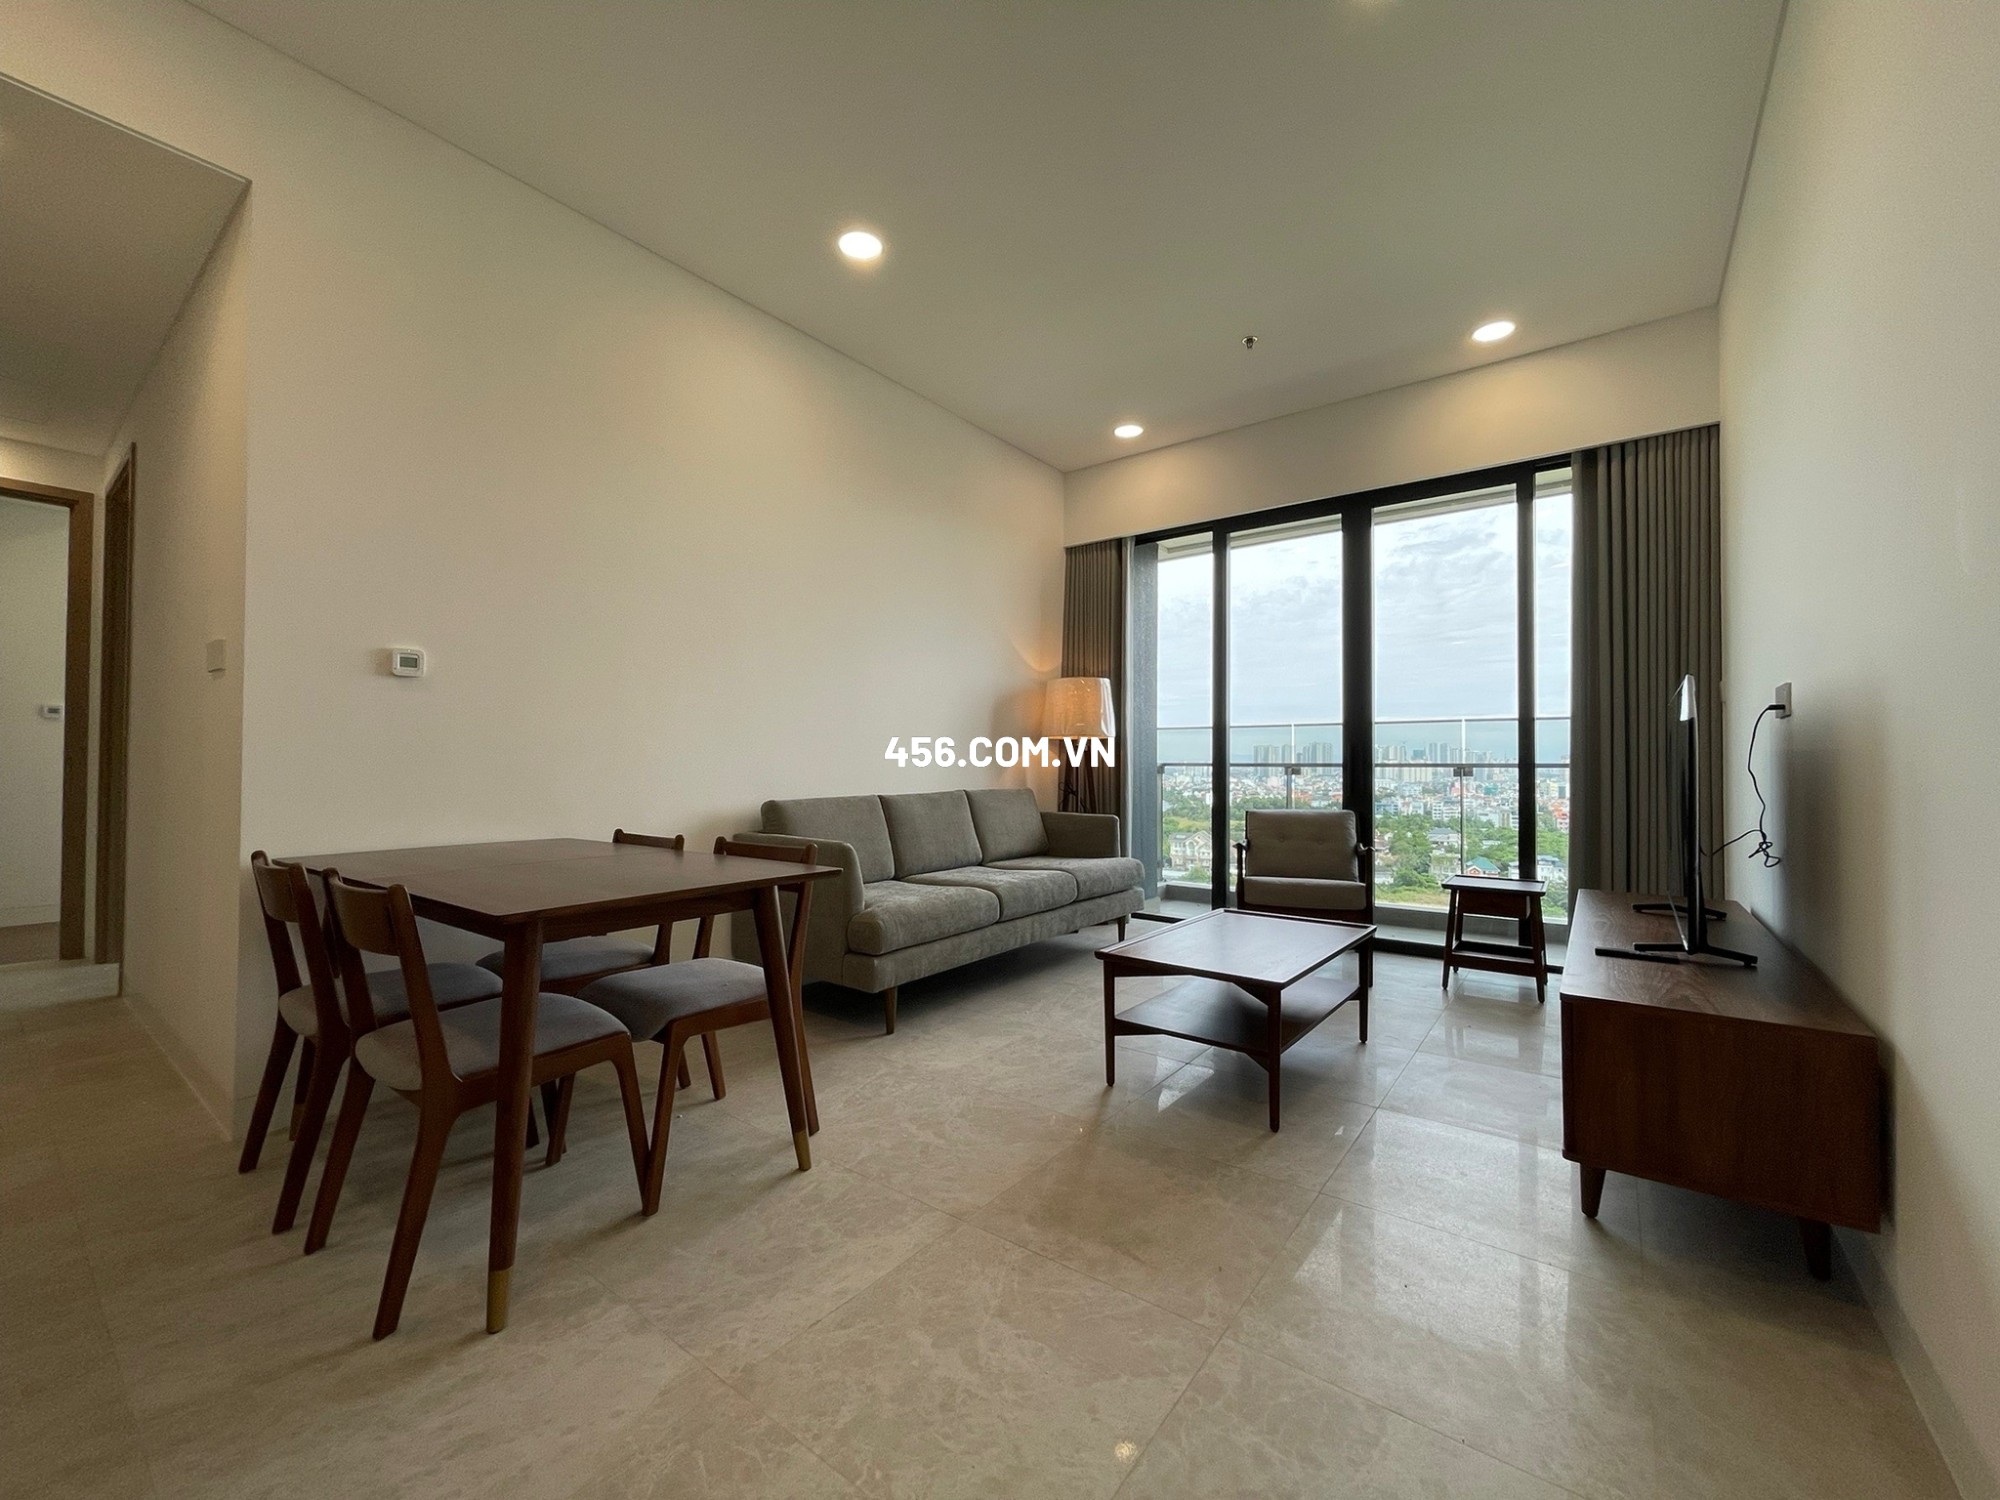 2 Bedrooms The River Thu Thiem Apartment For...